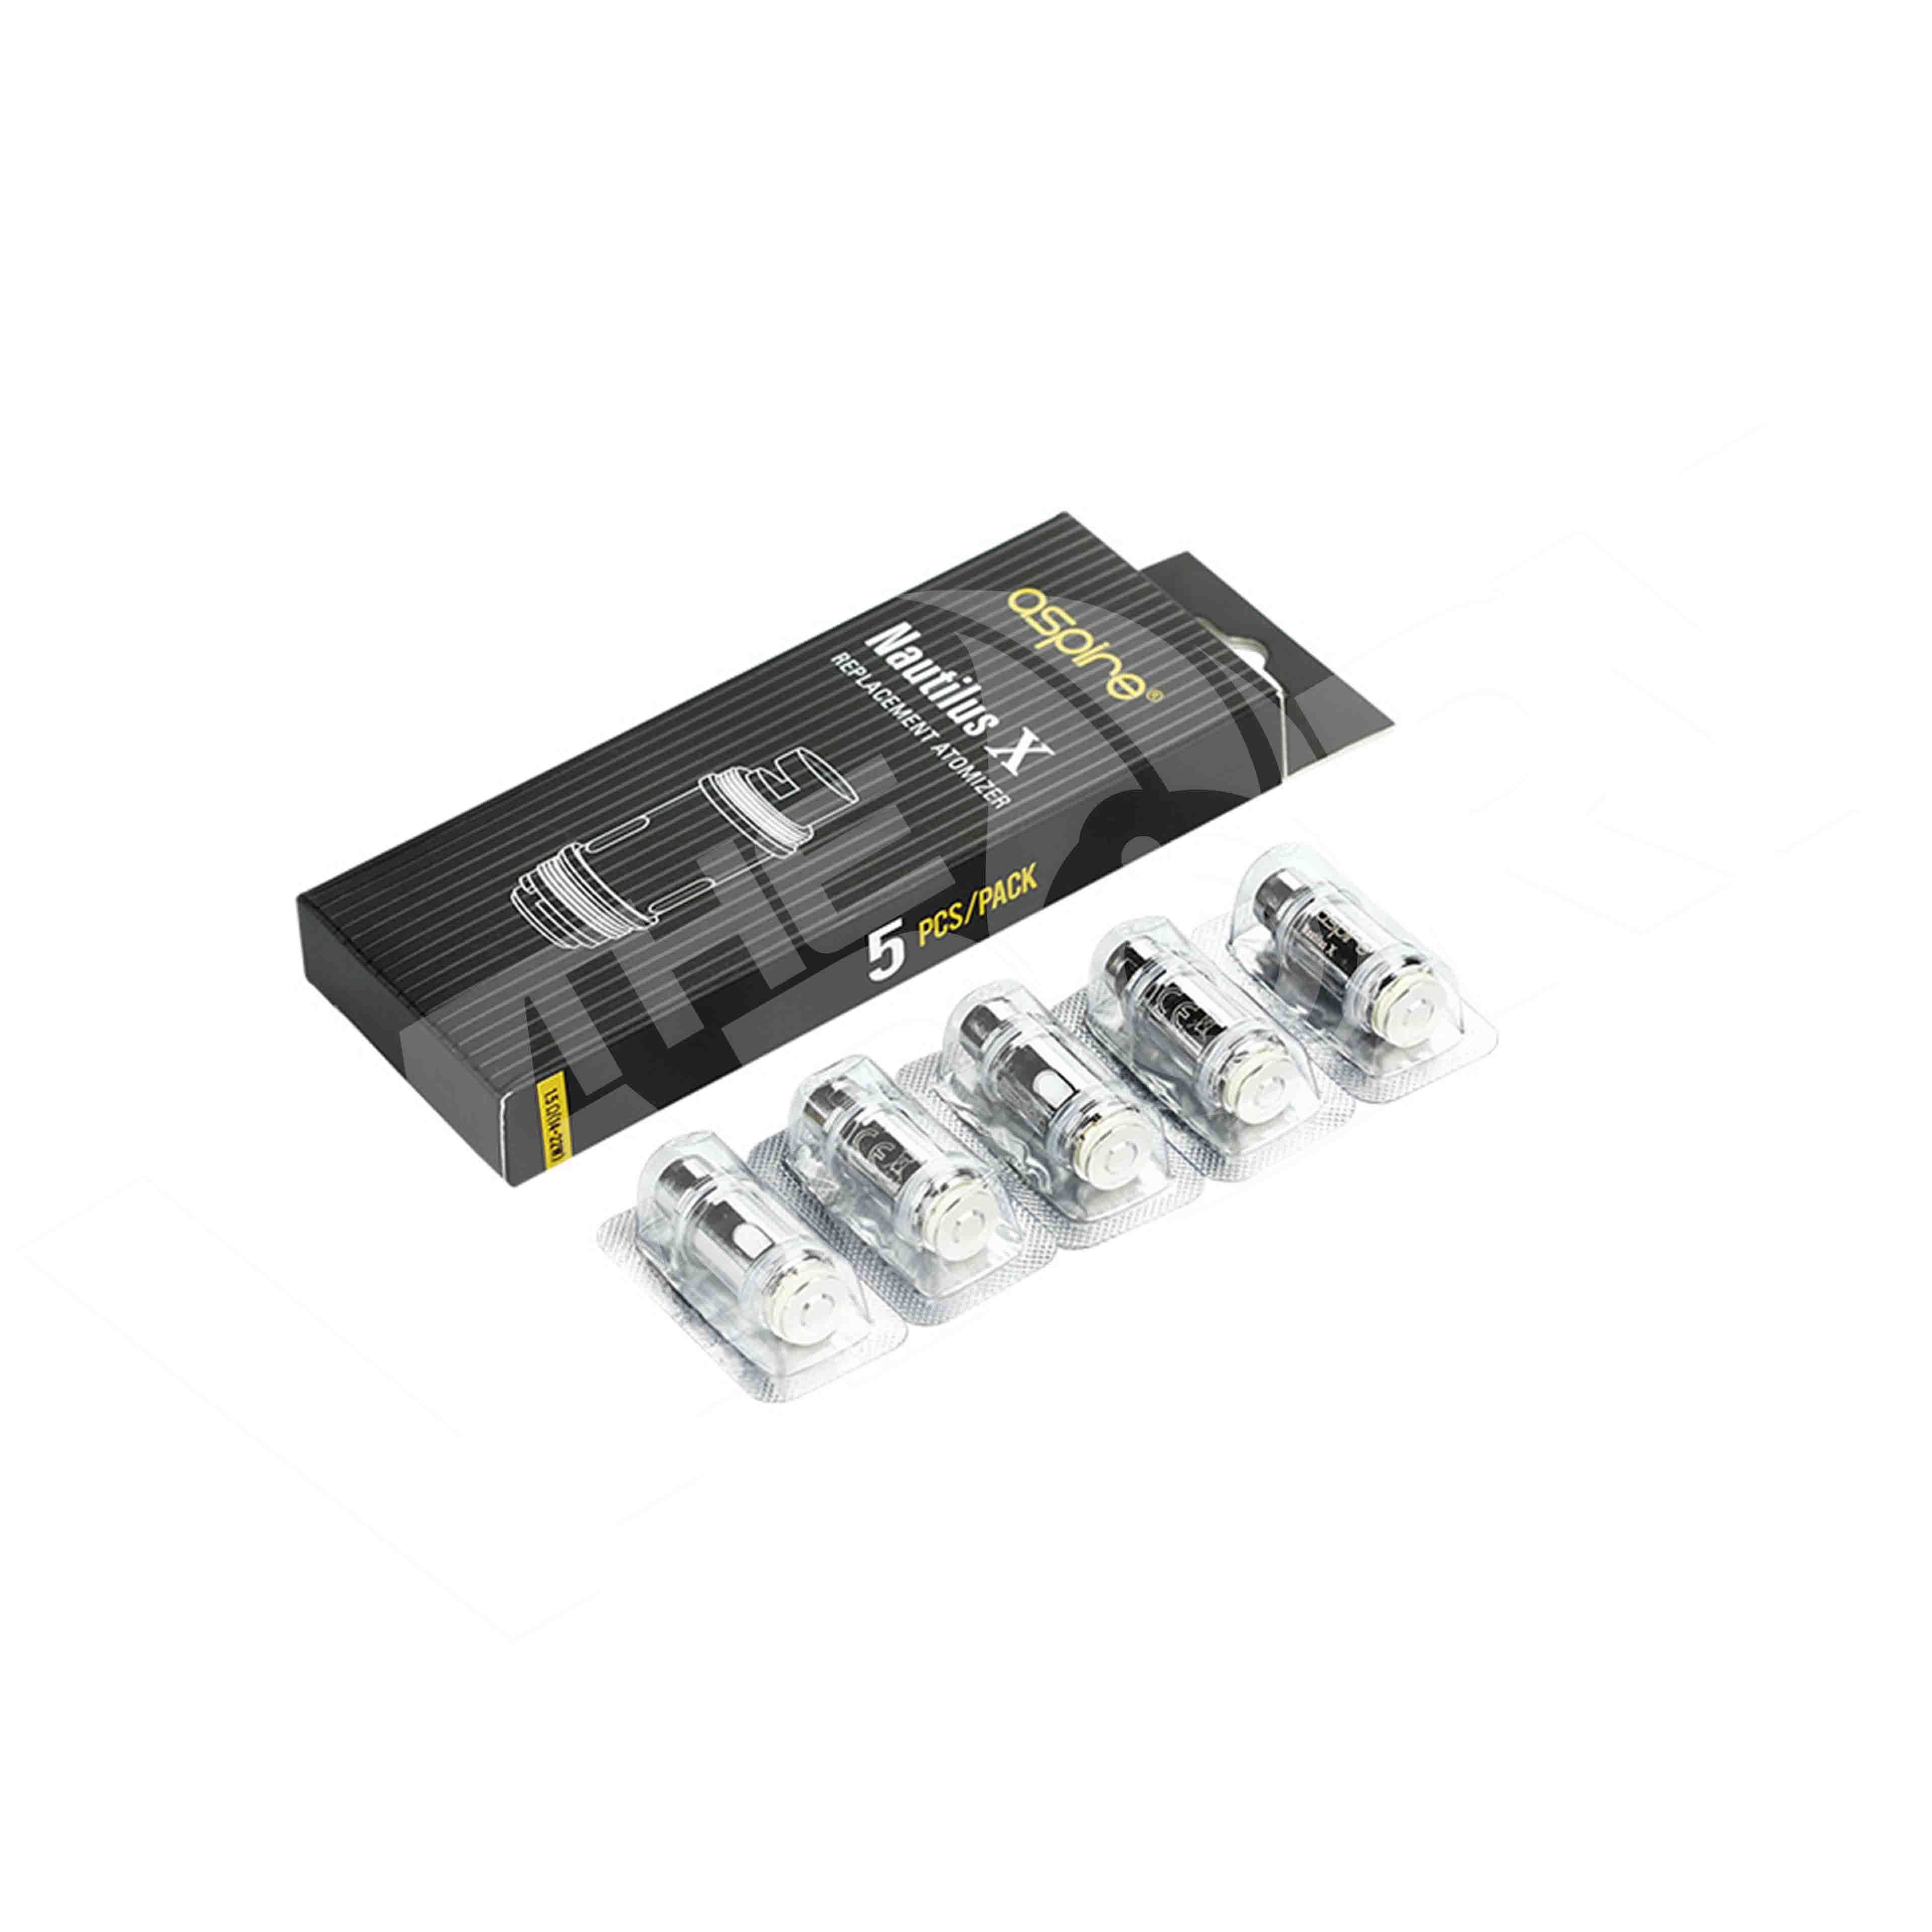 ASPIRE NAUTILUS X REPLACEMENT COILS REPLACEMENT COILS Pacific Smoke 